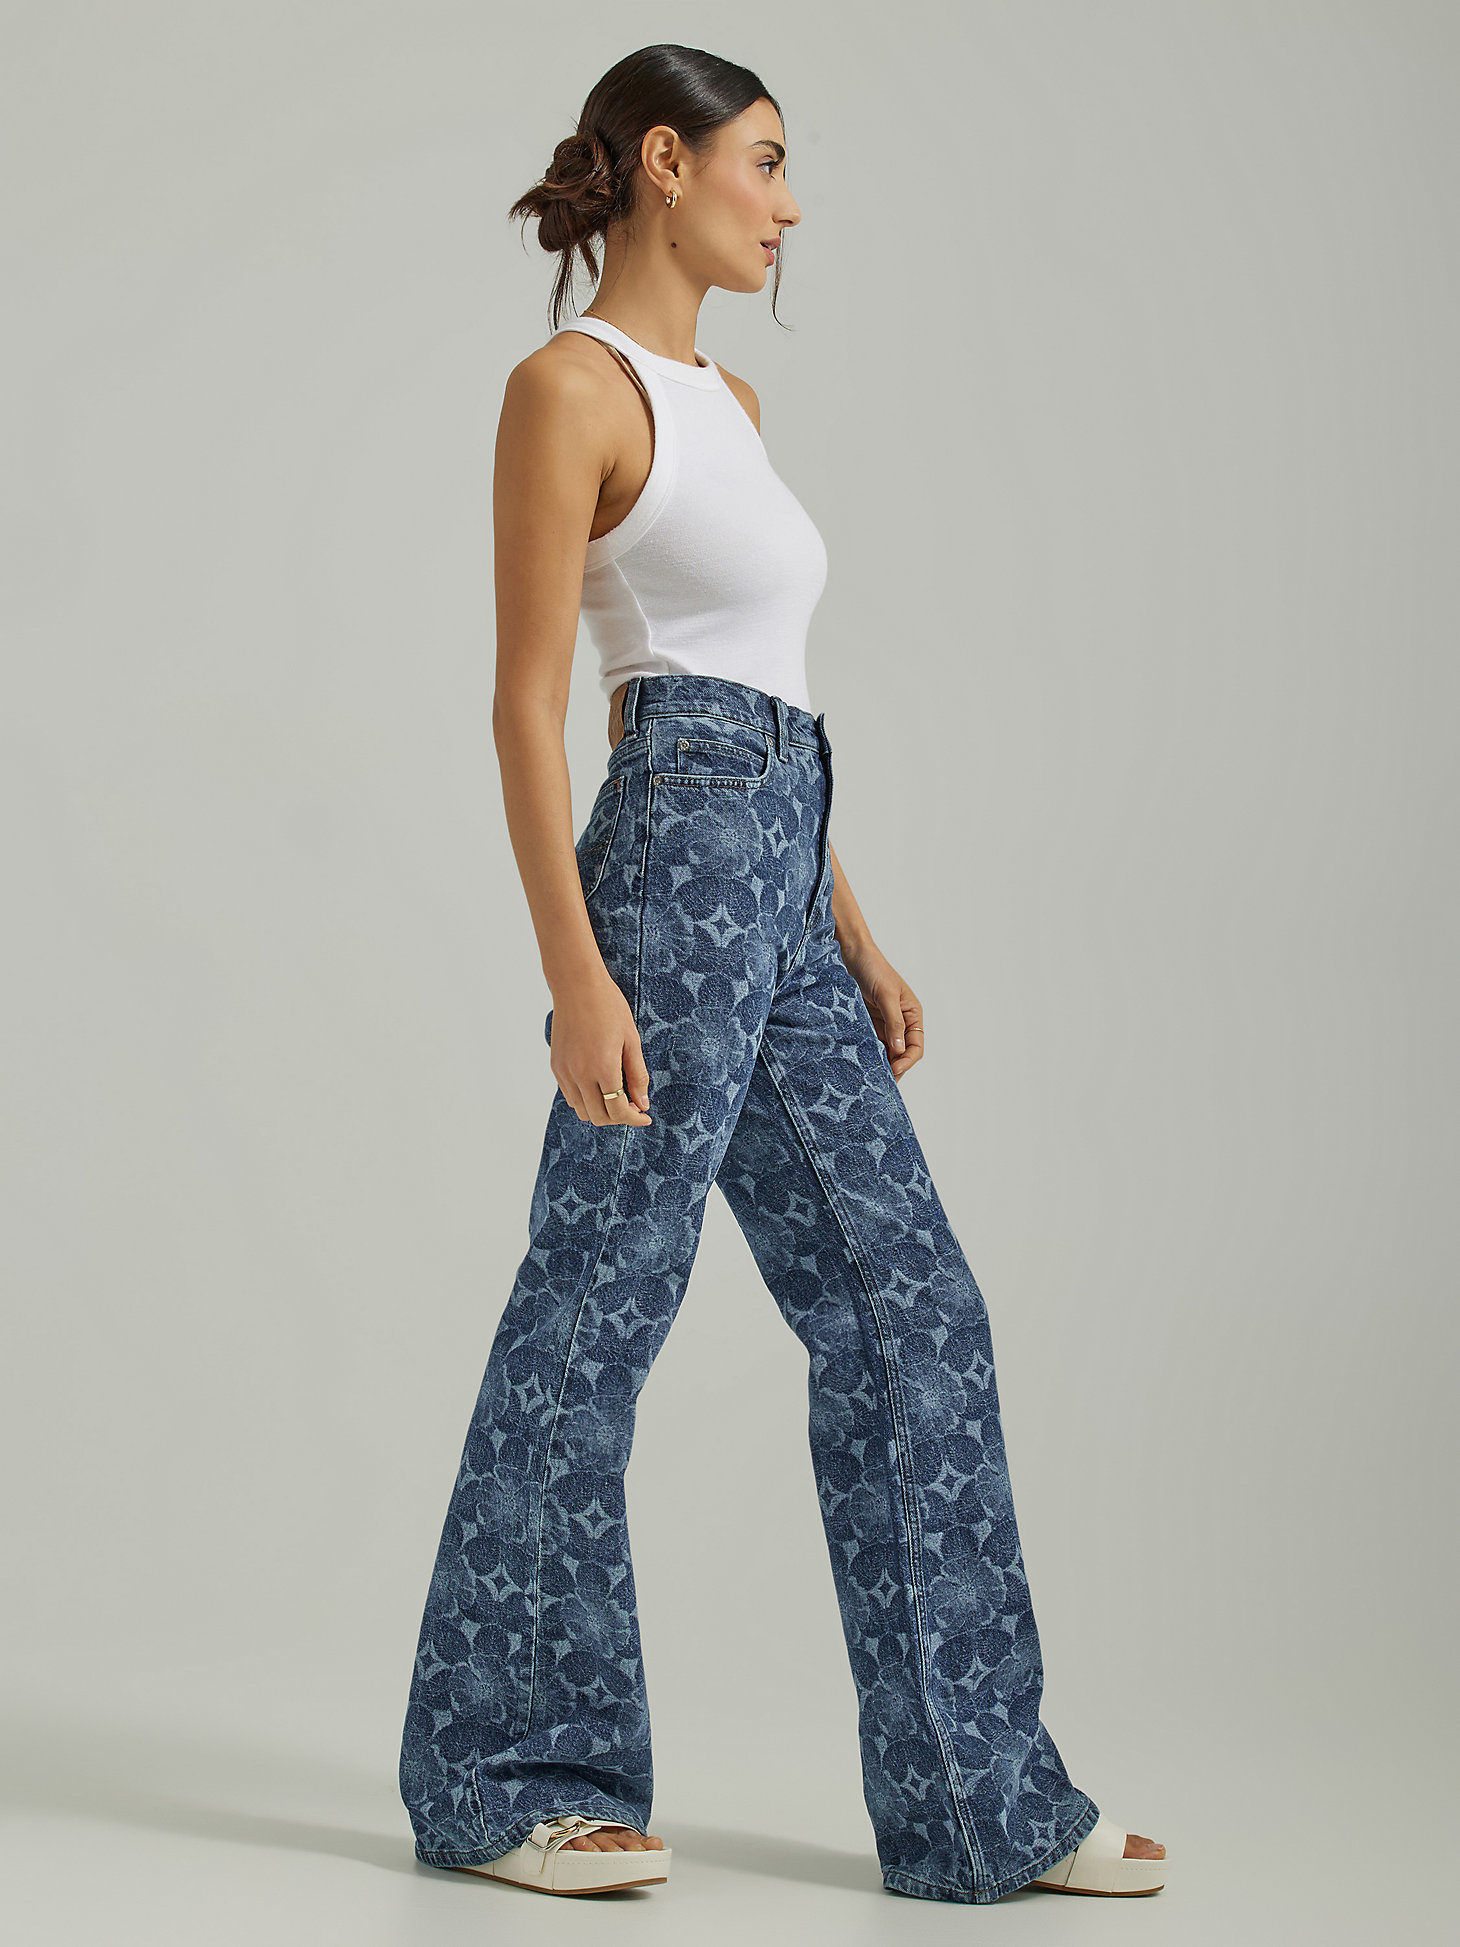 Women's High Rise Lasered Relaxed Flare Jean in Laser Floral alternative view 2